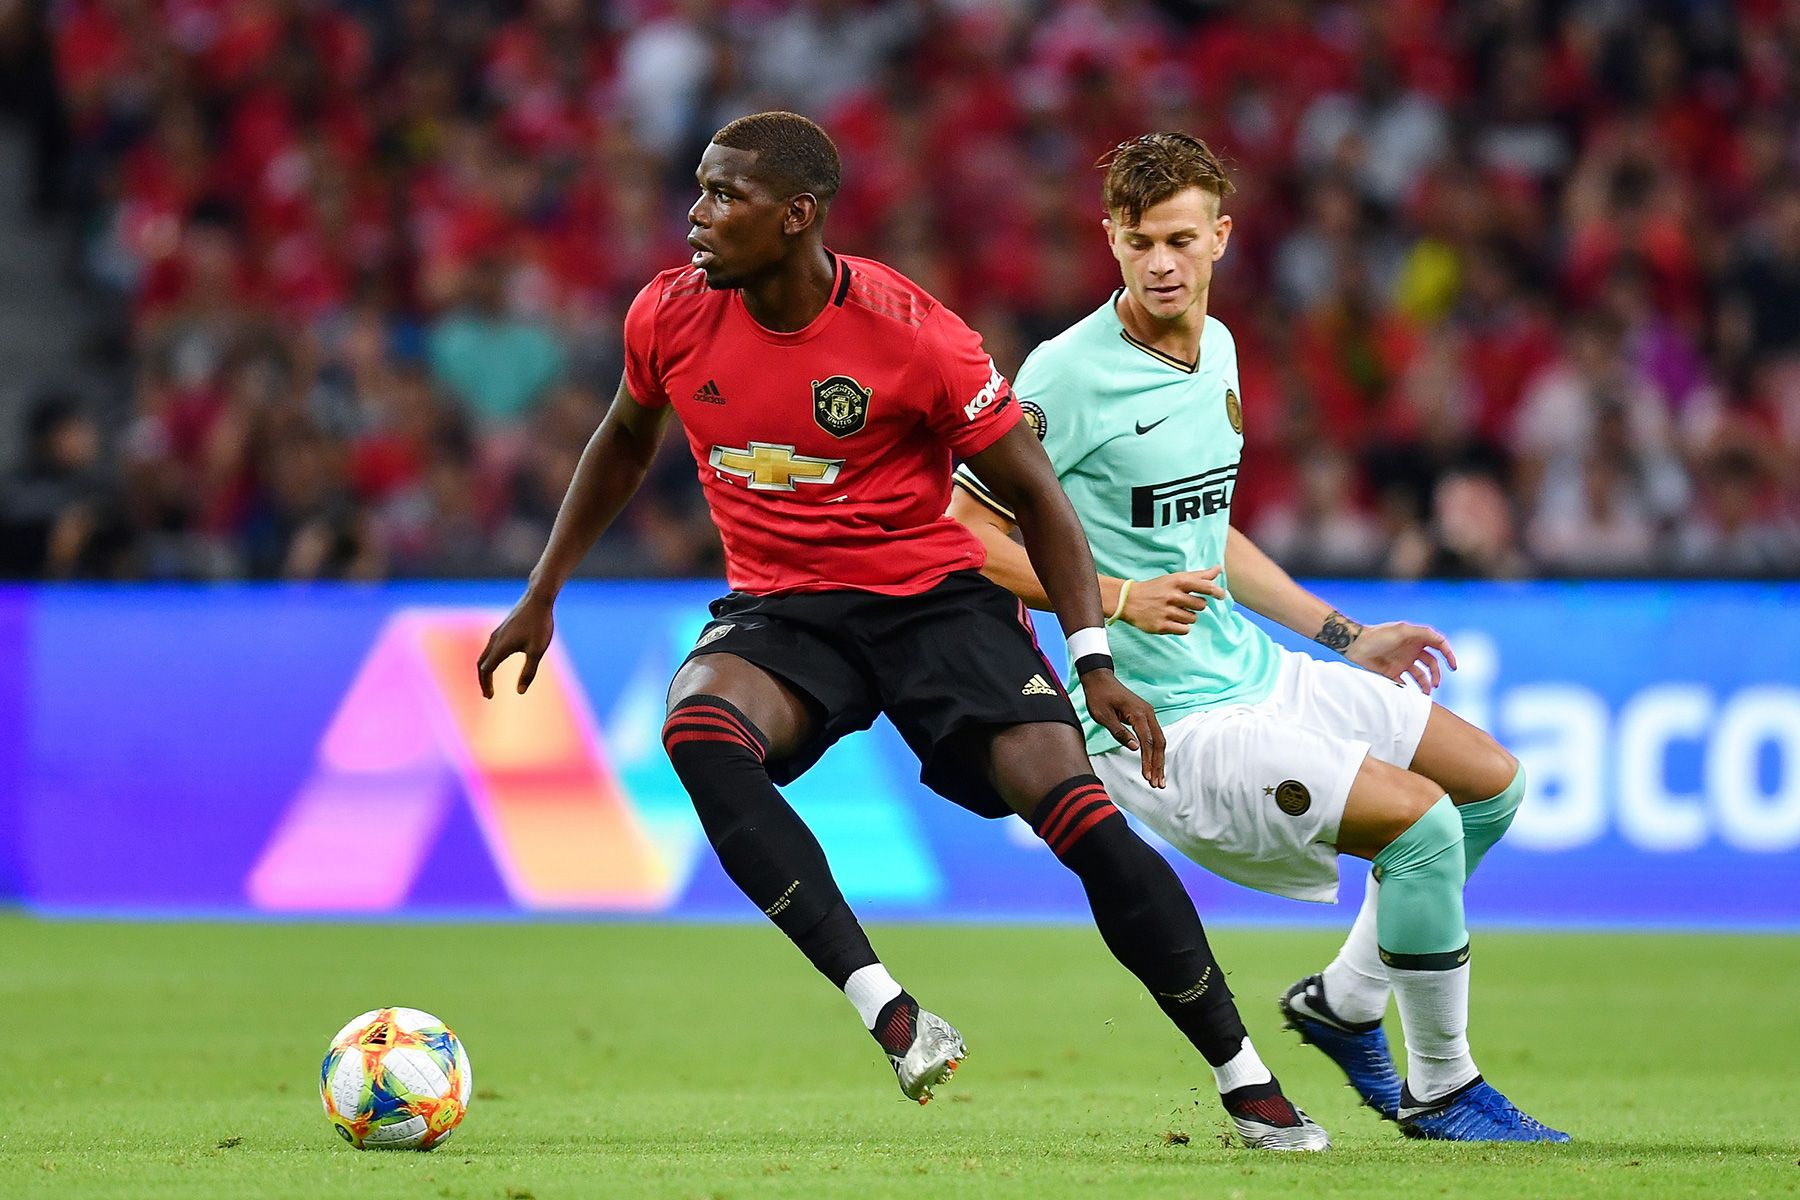 Pogba in a preseason match with Manchester United